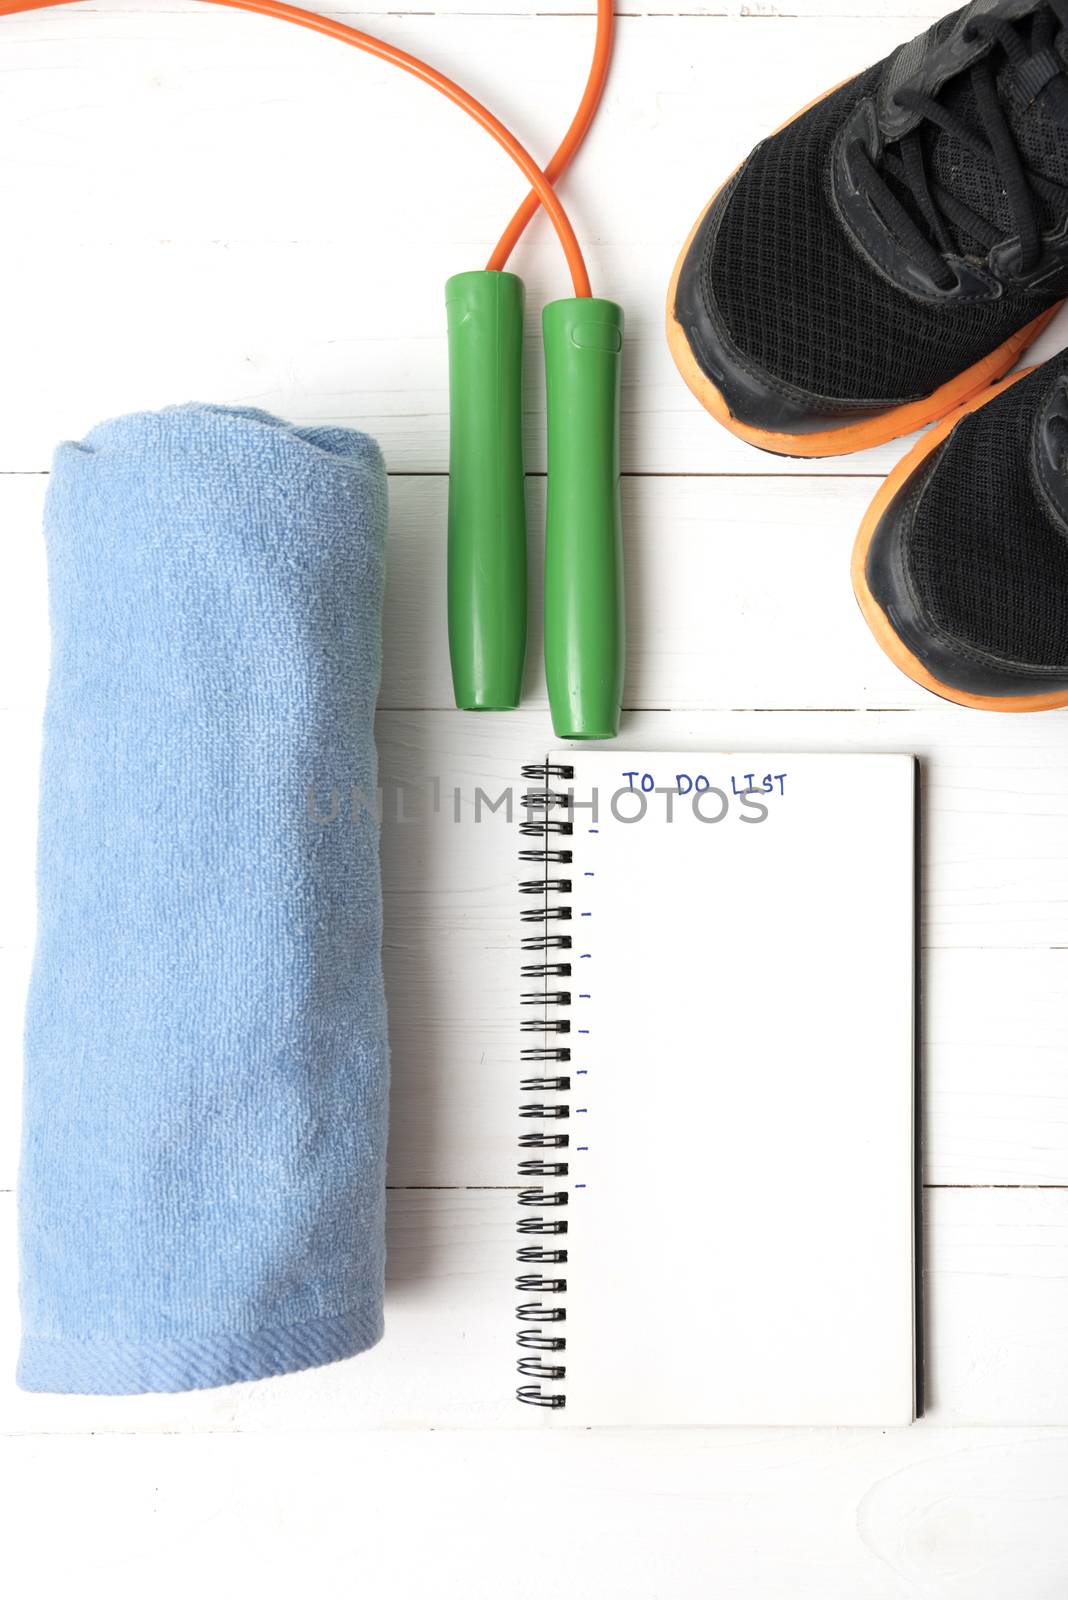 fitness equipment : running shoes,towel,jumping rope and notebook write to do list on white wood table